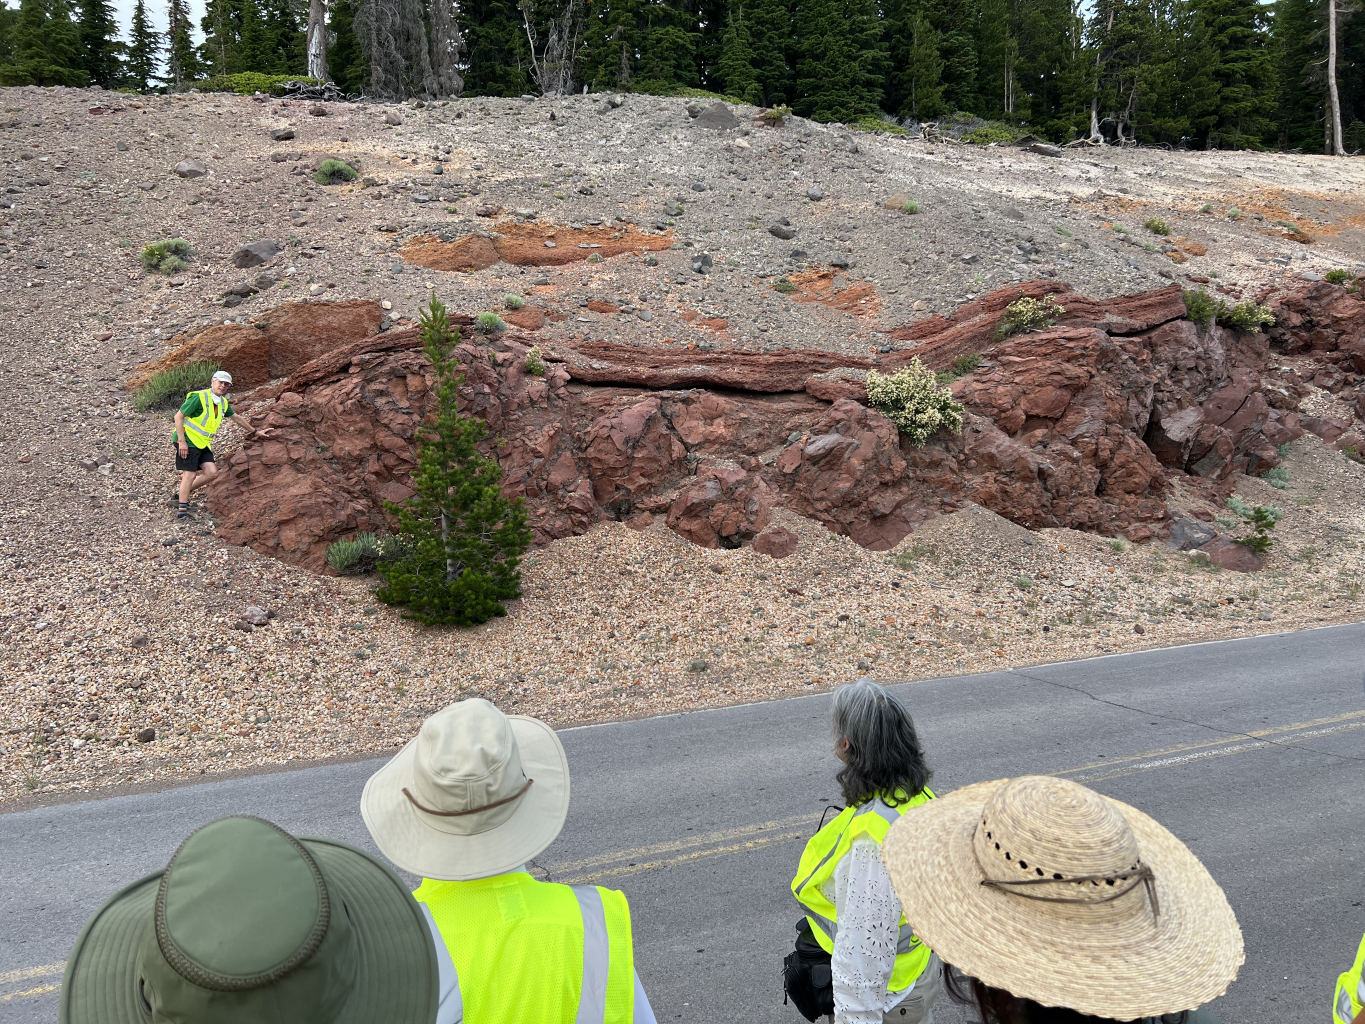  Stop 9 - Pumice of Cleetwood Cove. This flow occurred directly prior to the climactic eruption and some of the material oozed back into the crater after the eruption. 